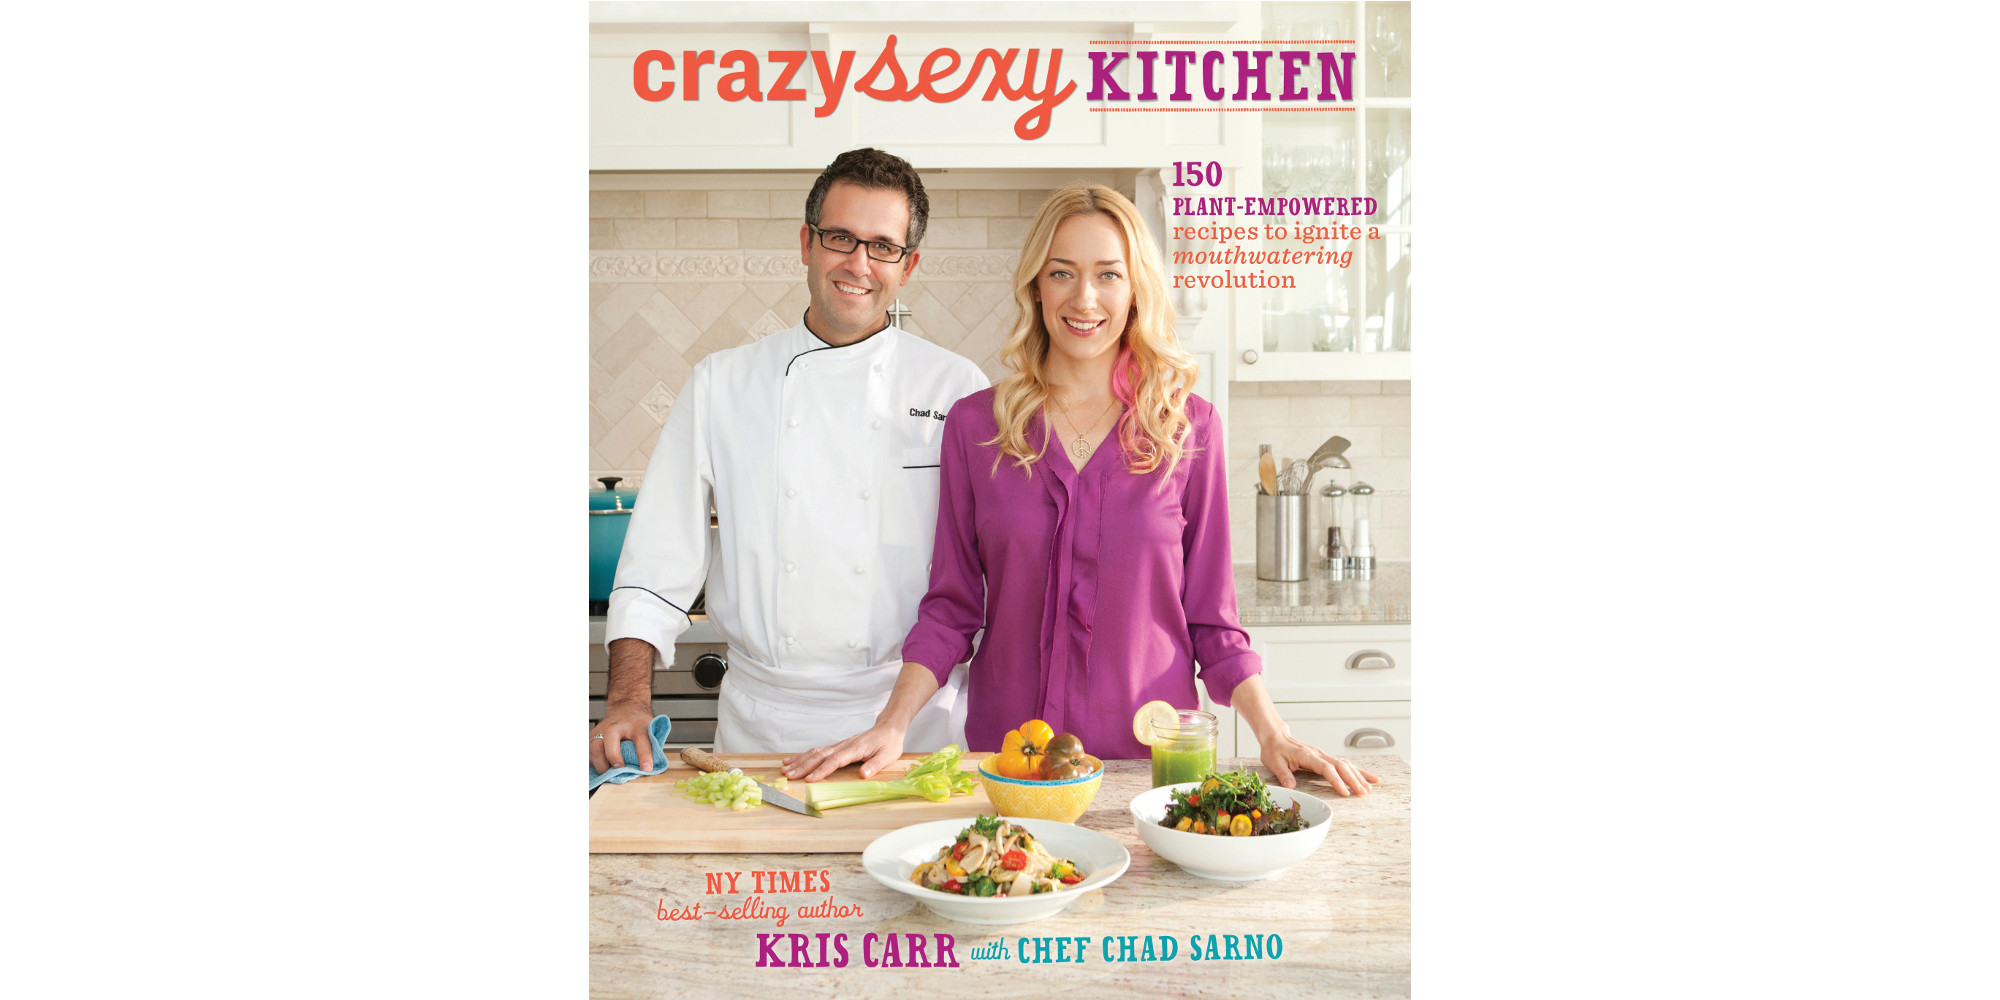 Crazy Sexy Kitchen by Kris Carr